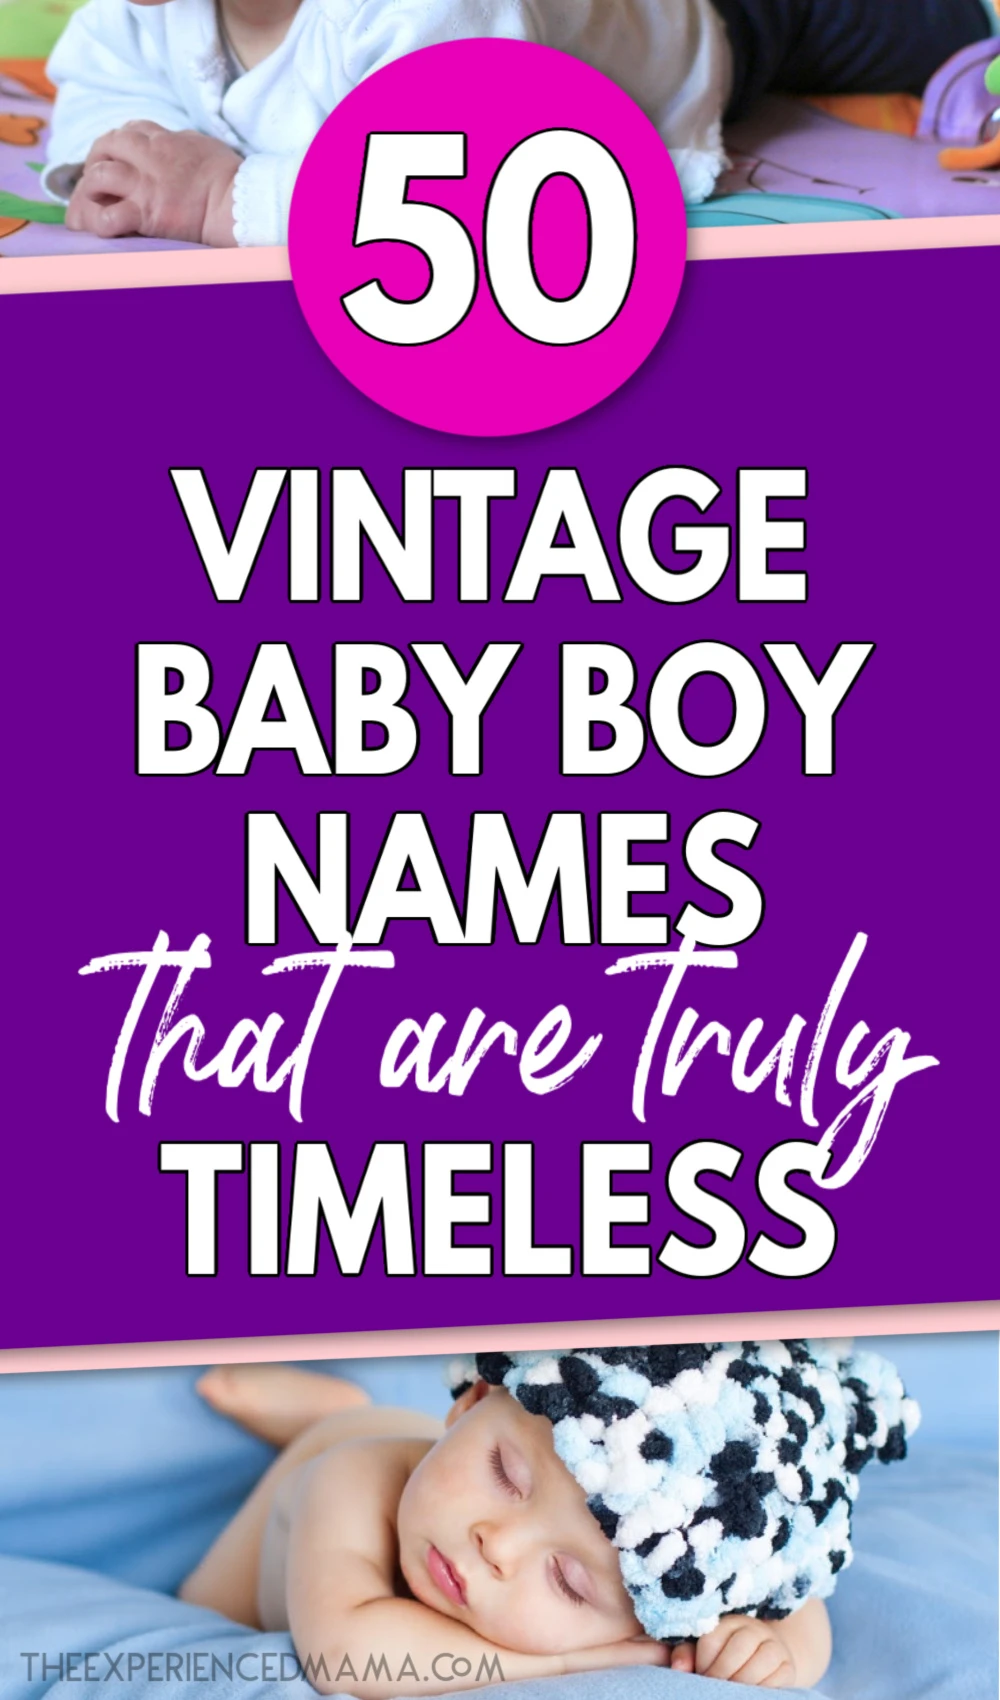 graphic with text overlay "50 vintage baby boy names that are truly timeless"